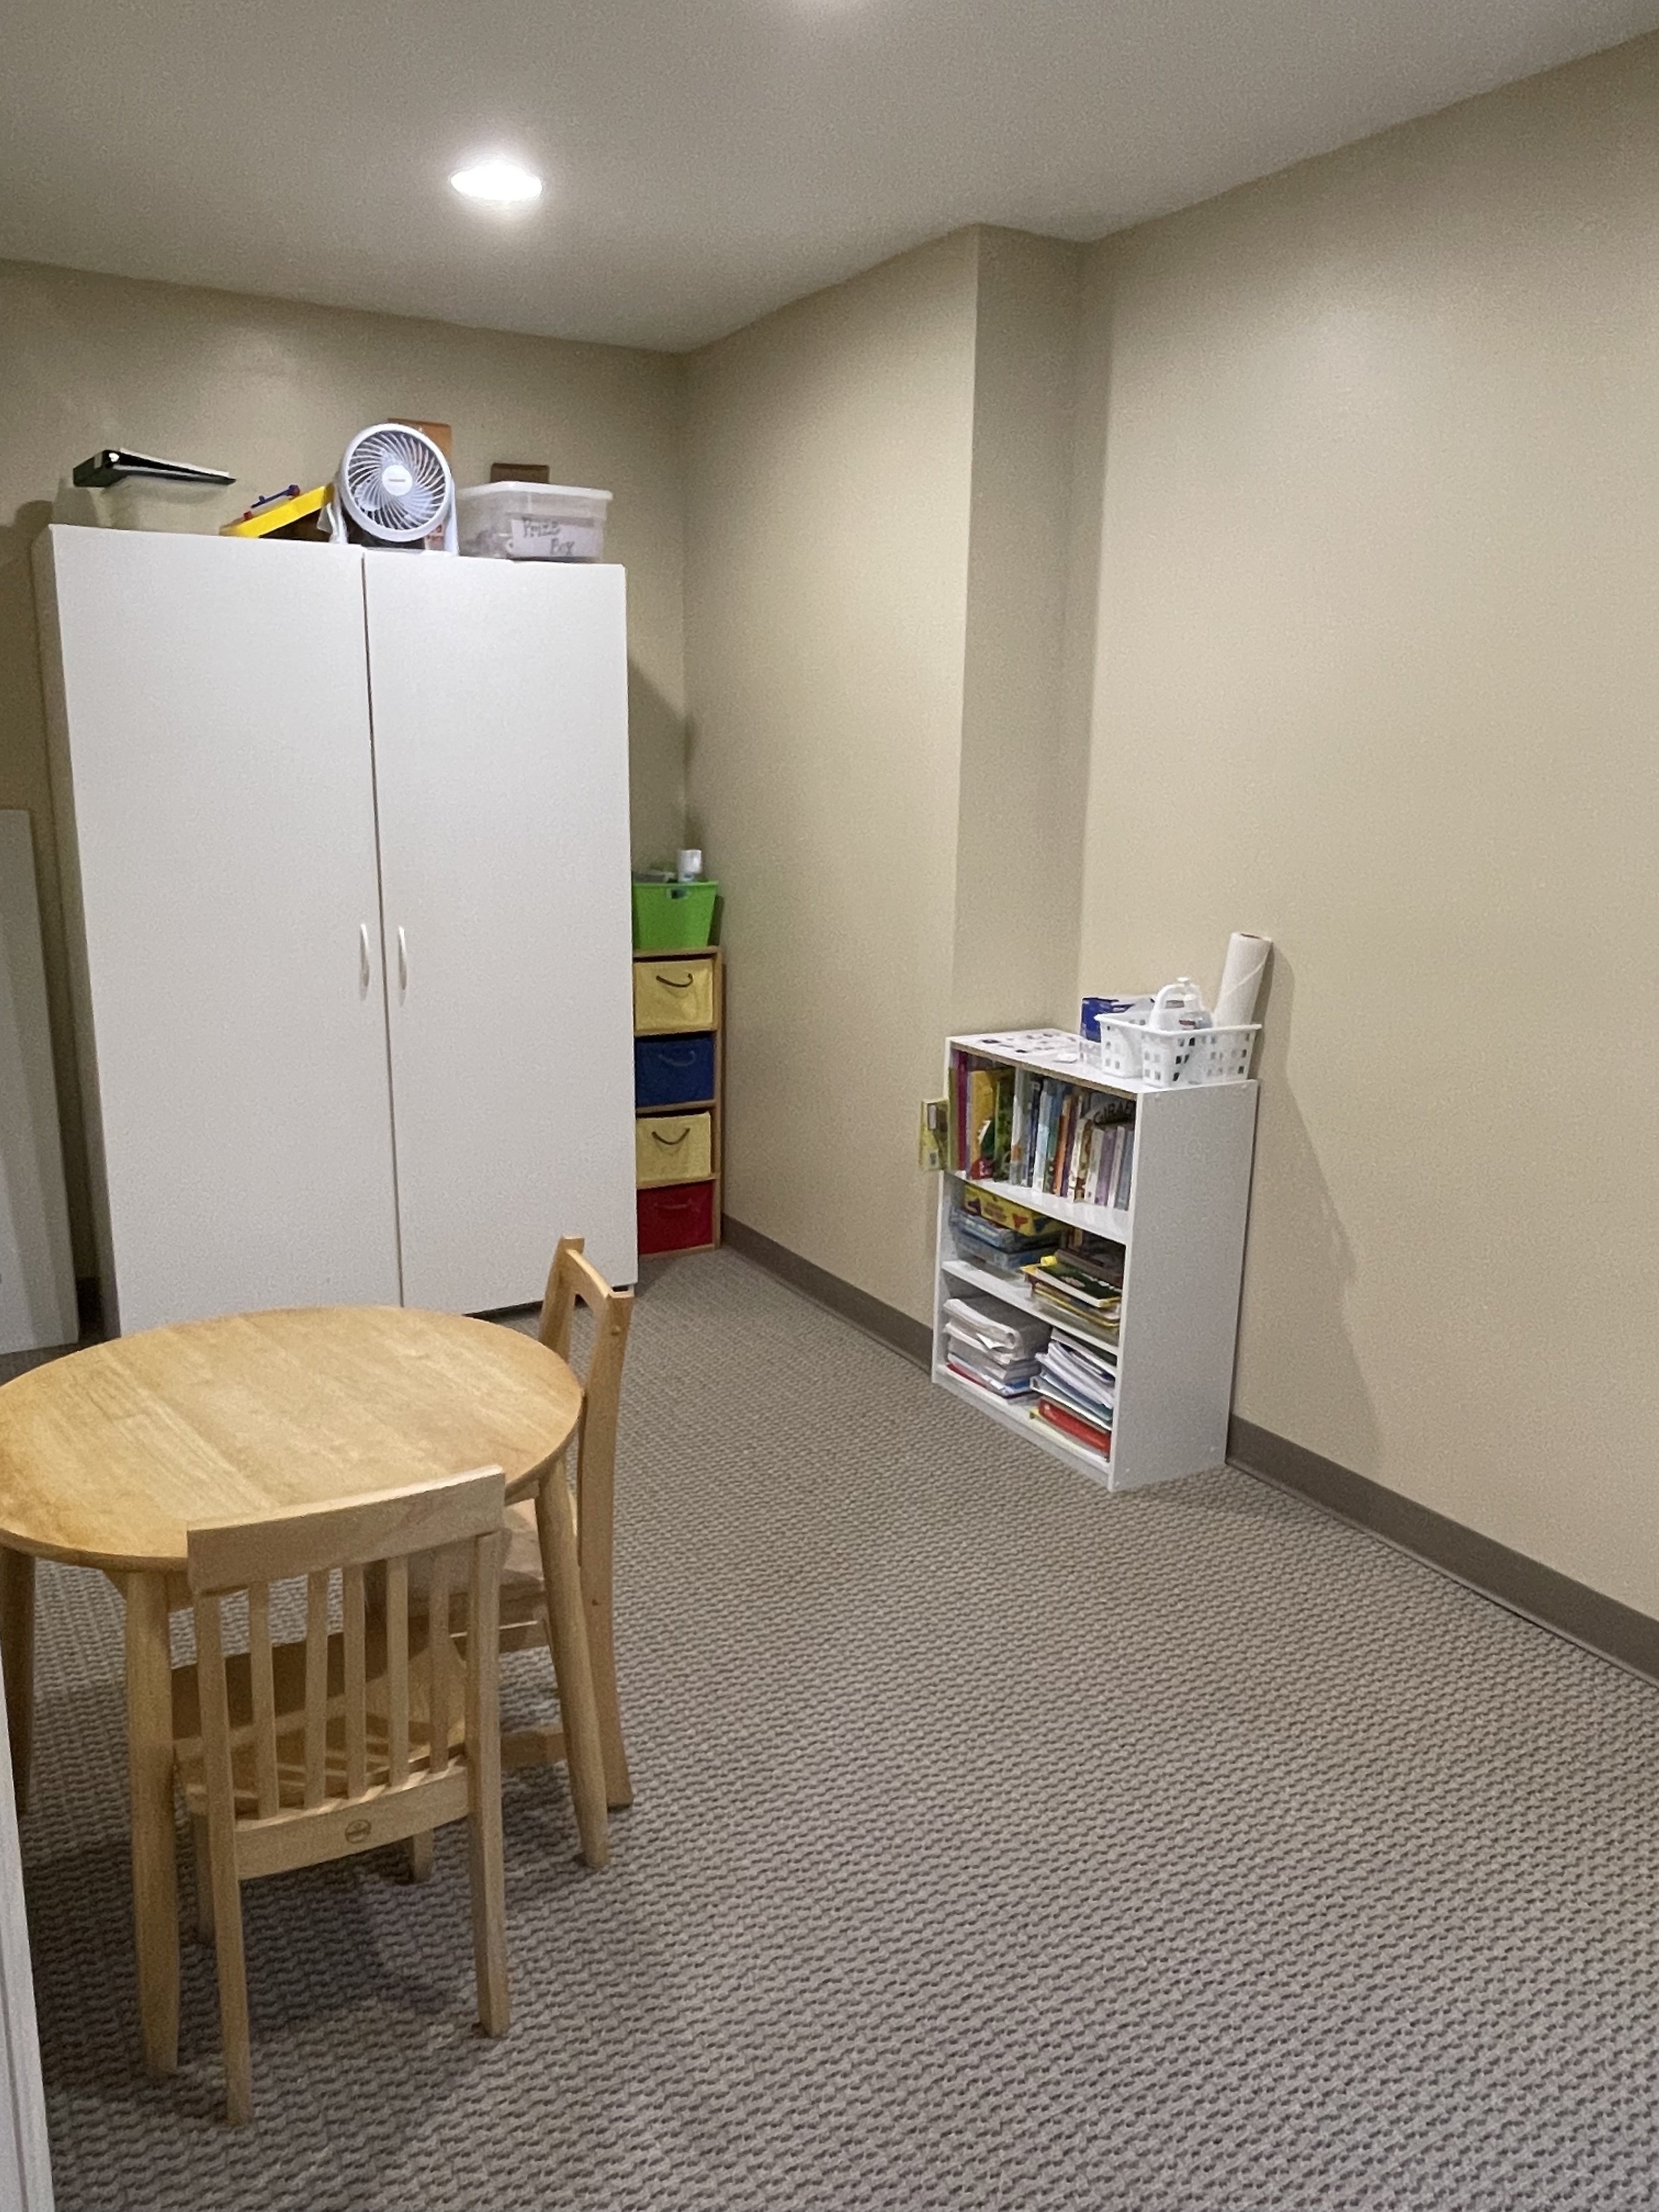 Speech Therapy Room